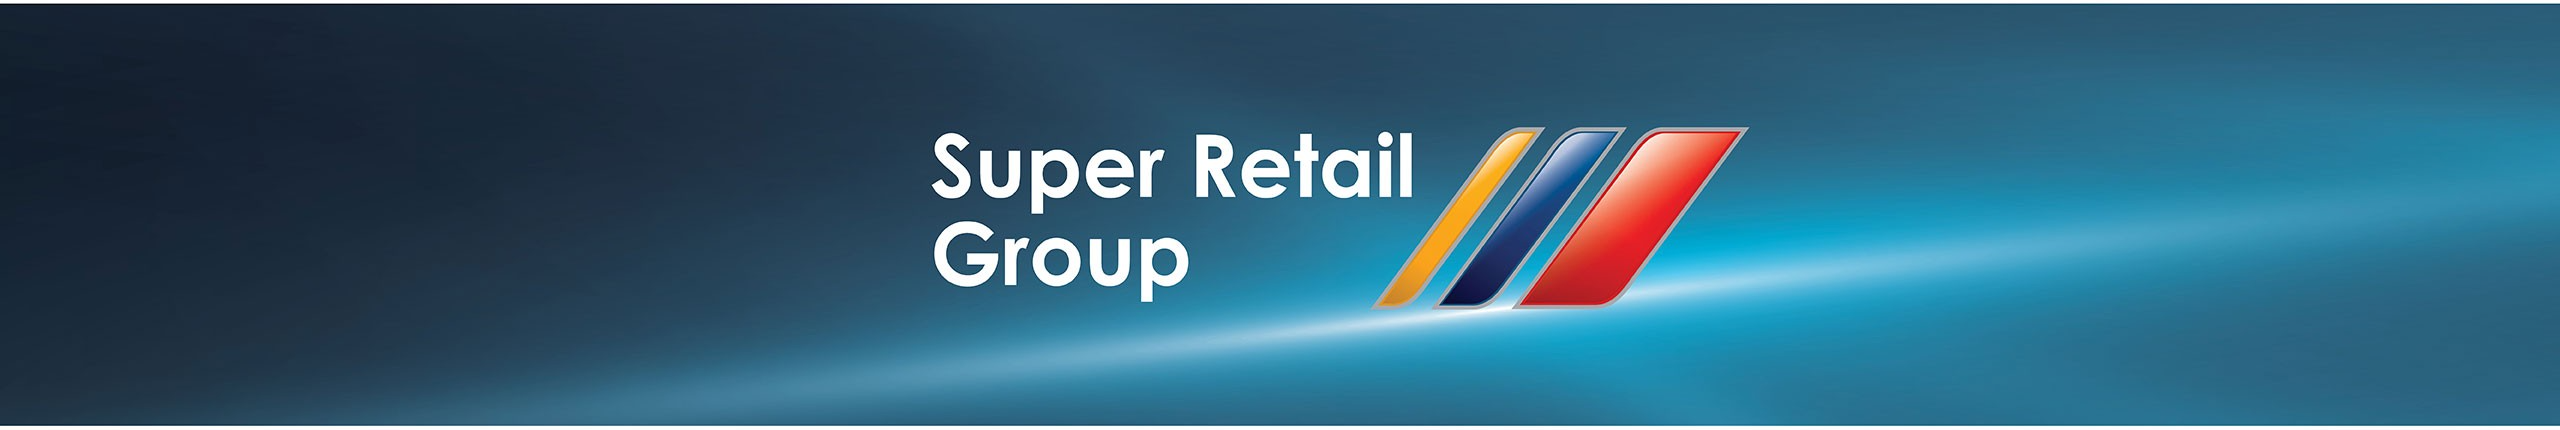 Super Retail Group background